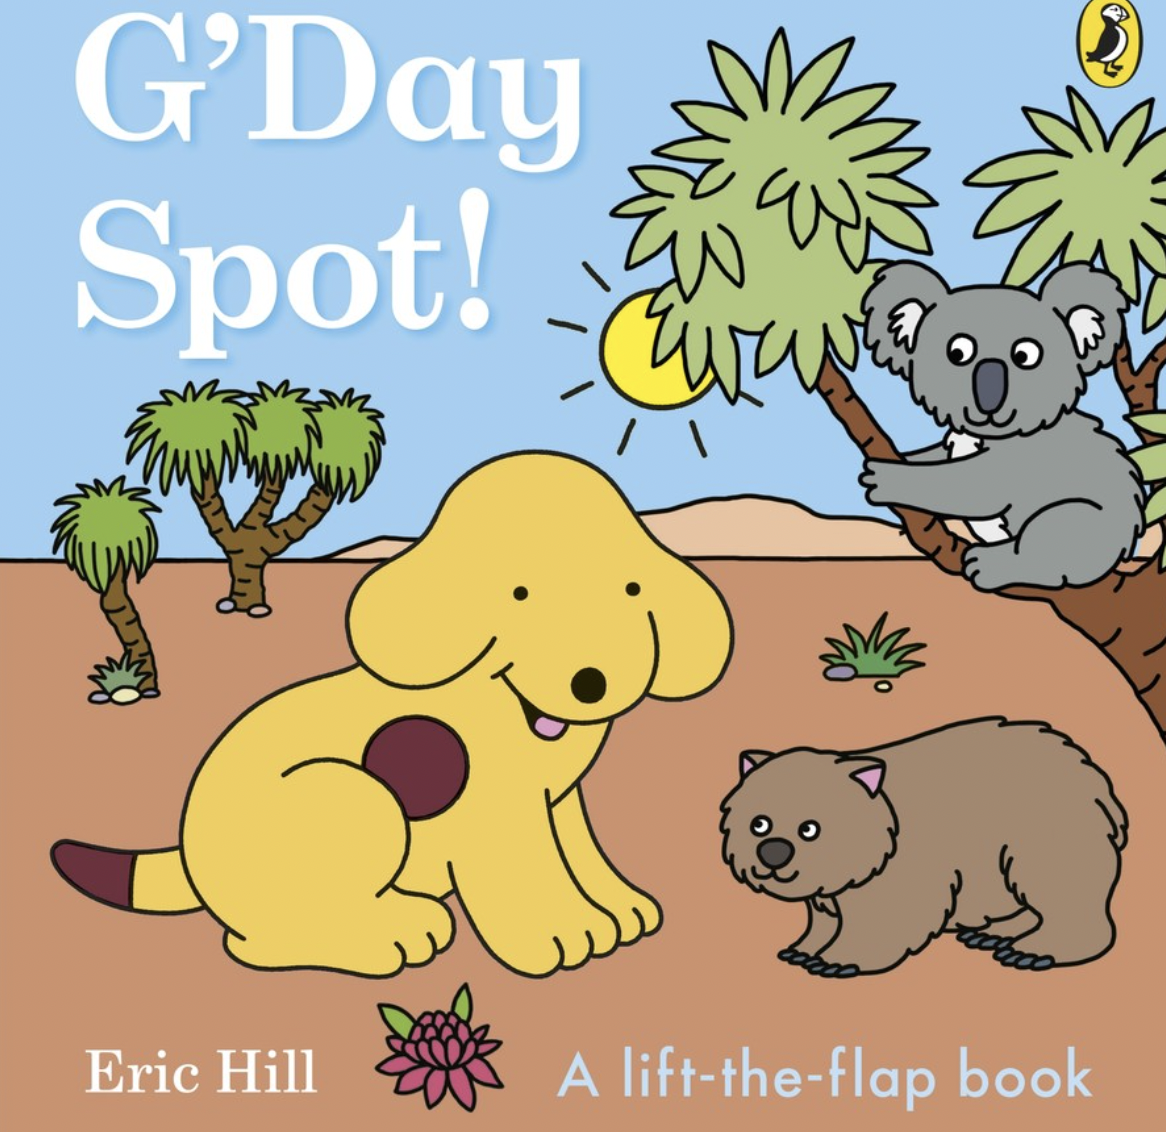 G'Day Spot! by Eric Hill